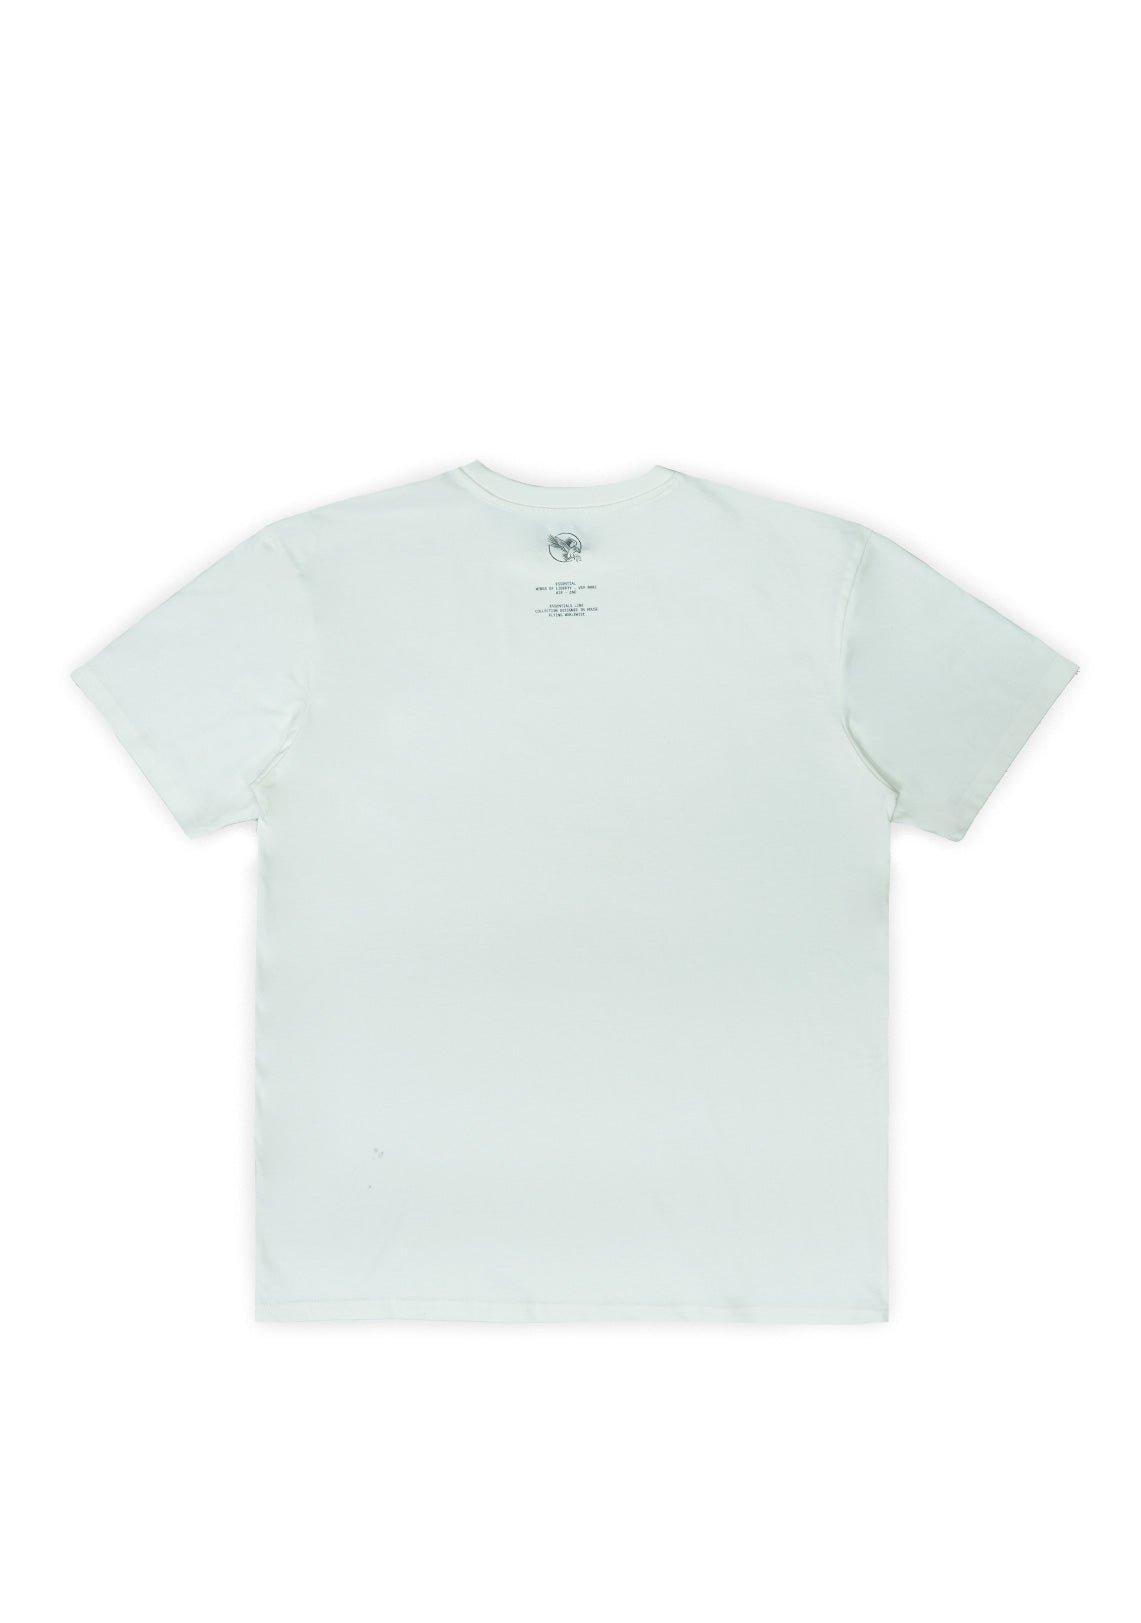 Off White Essential T-Shirt - Wings Of Liberty Clothing